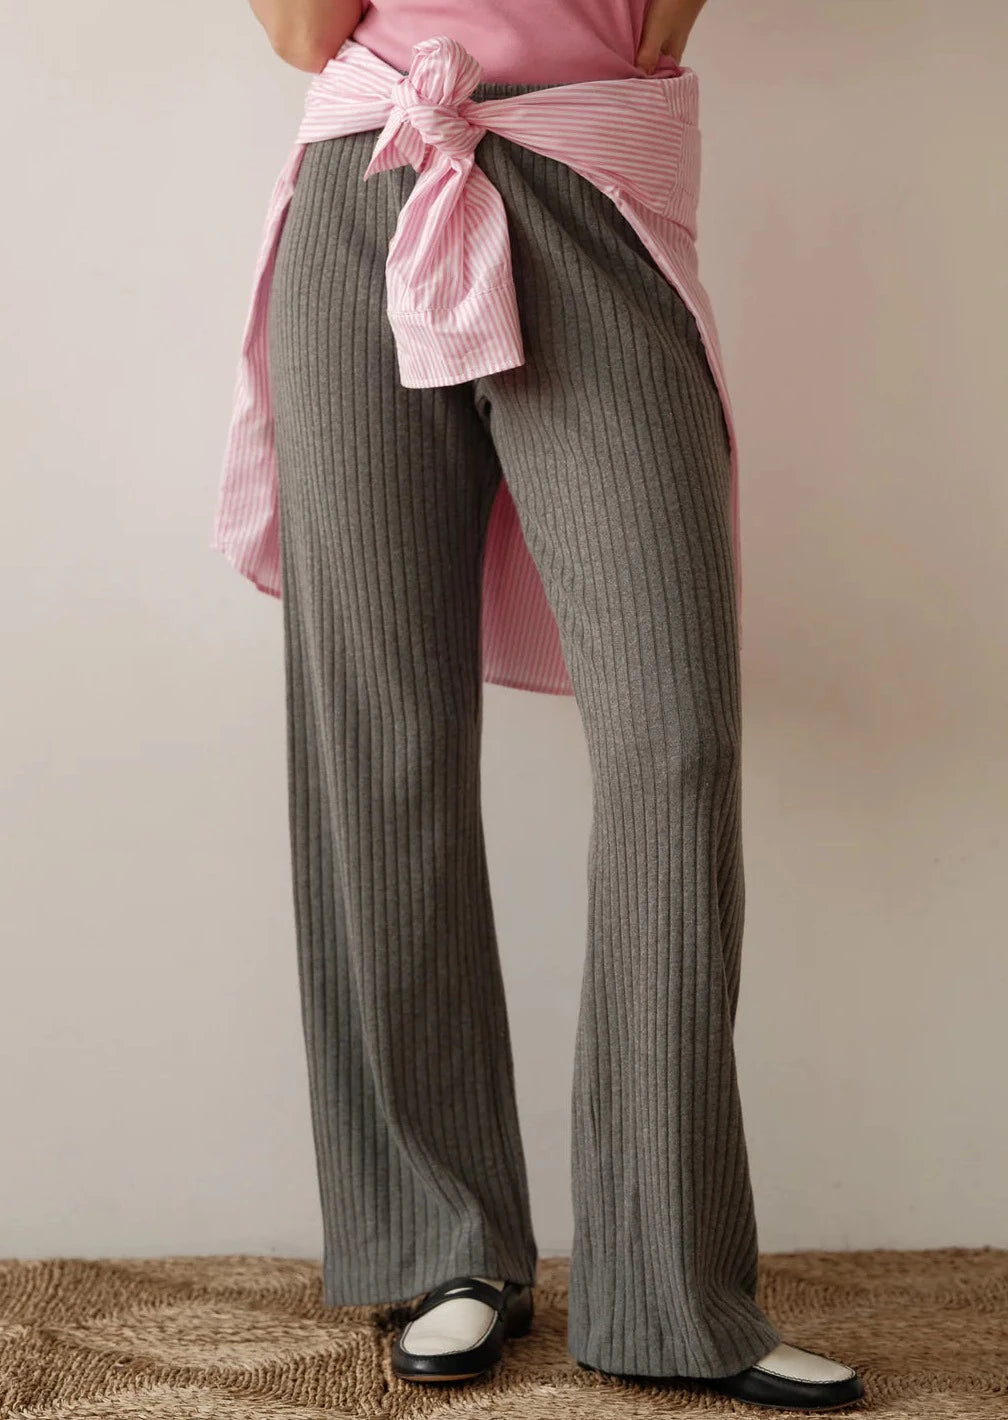 An image of the bottom half of a model wearing the Sweater Rib Simple Pants in Charcoal styled with a pink blouse tied around her waist